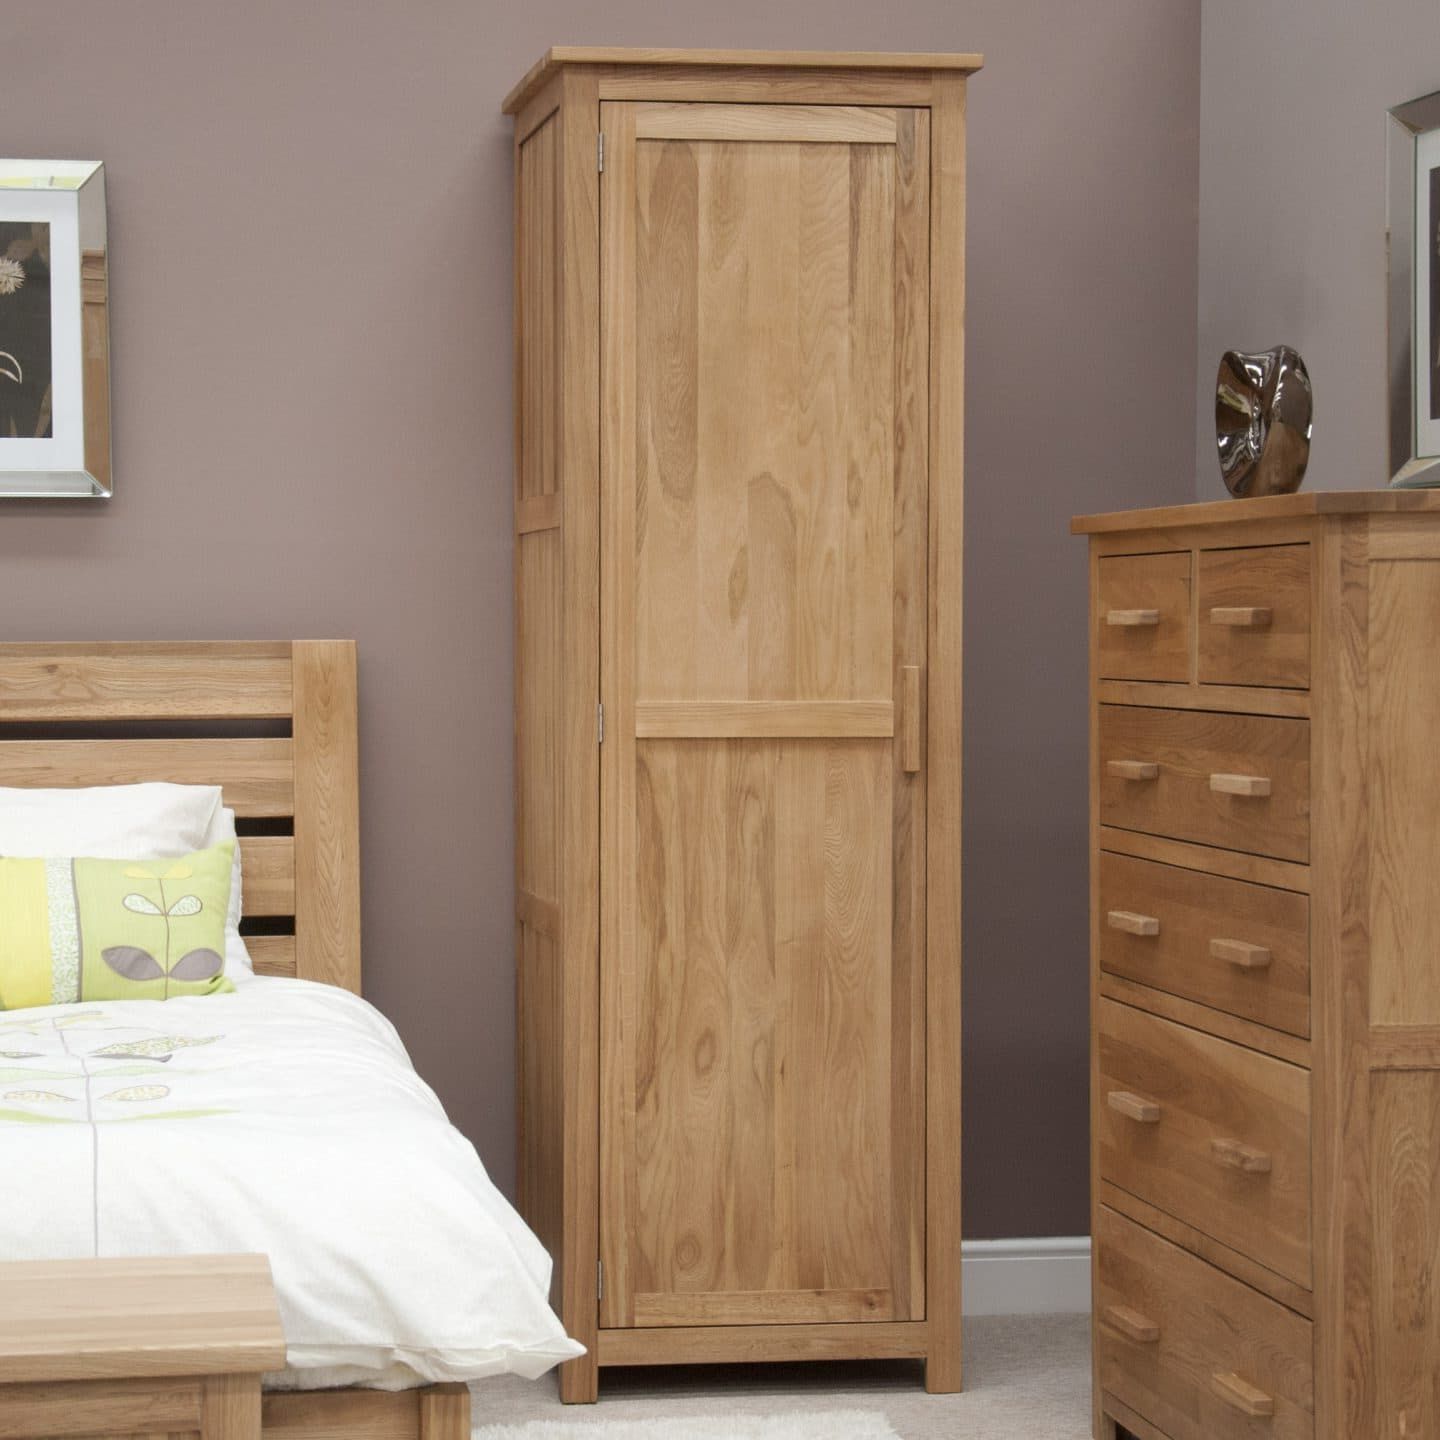 Harwell Oak Single Wardrobe – Only Oak Furniture – Free Delivery Throughout Single Oak Wardrobes With Drawers (Gallery 5 of 20)